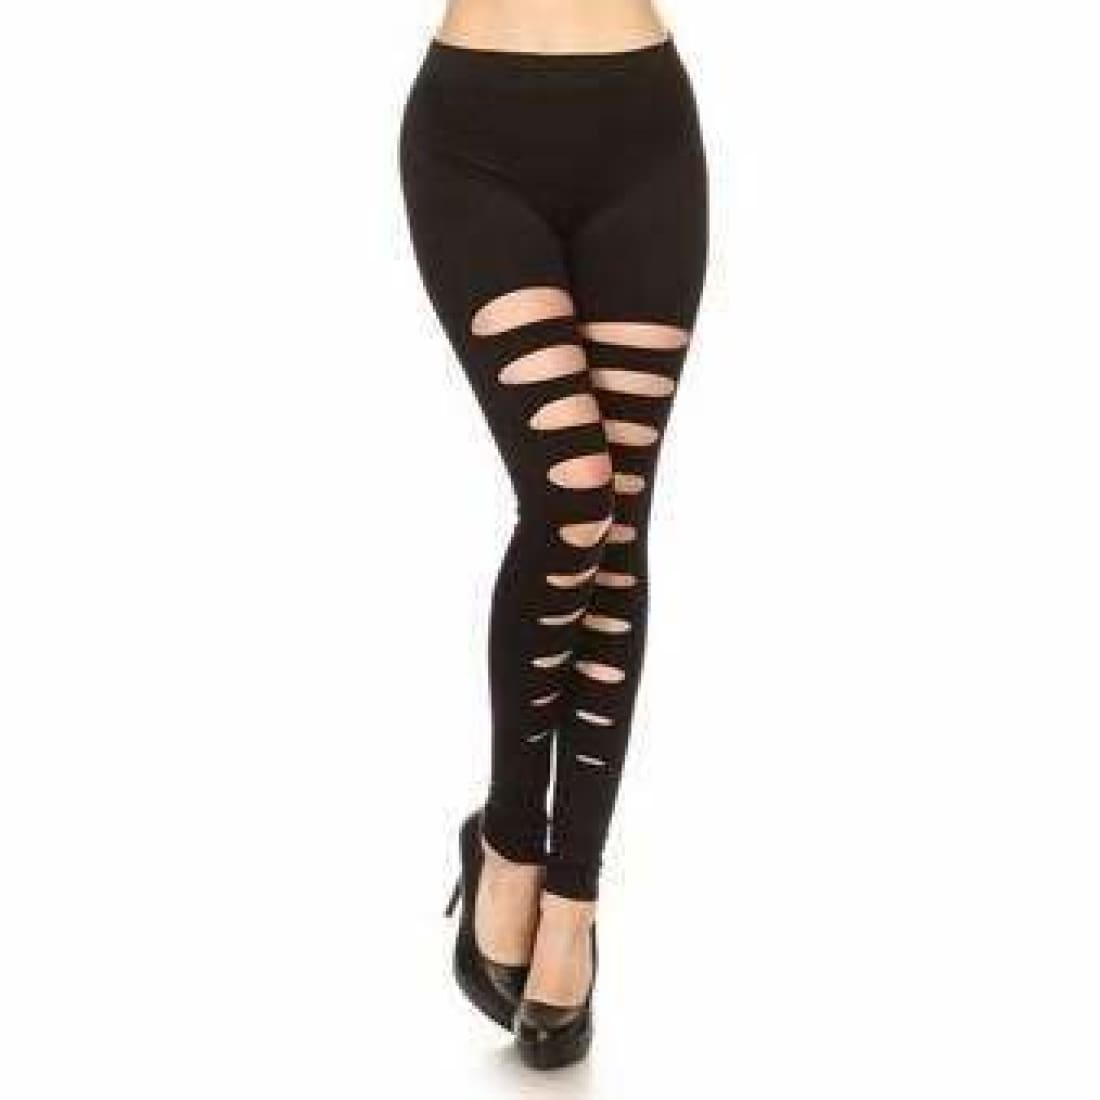 Yelete Ready For Action Full Size Ankle Cutout Active Leggings in